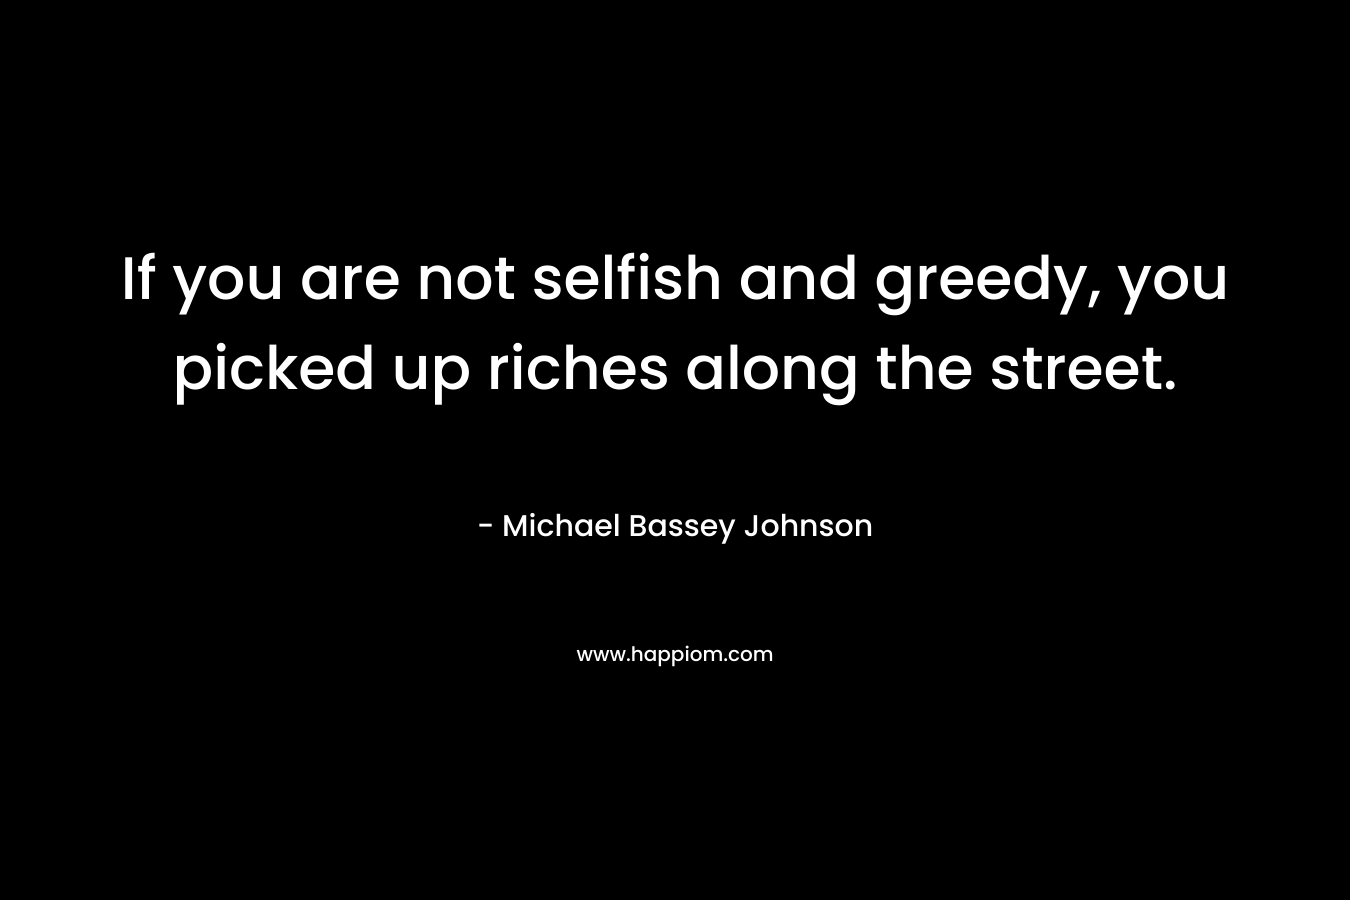 If you are not selfish and greedy, you picked up riches along the street.